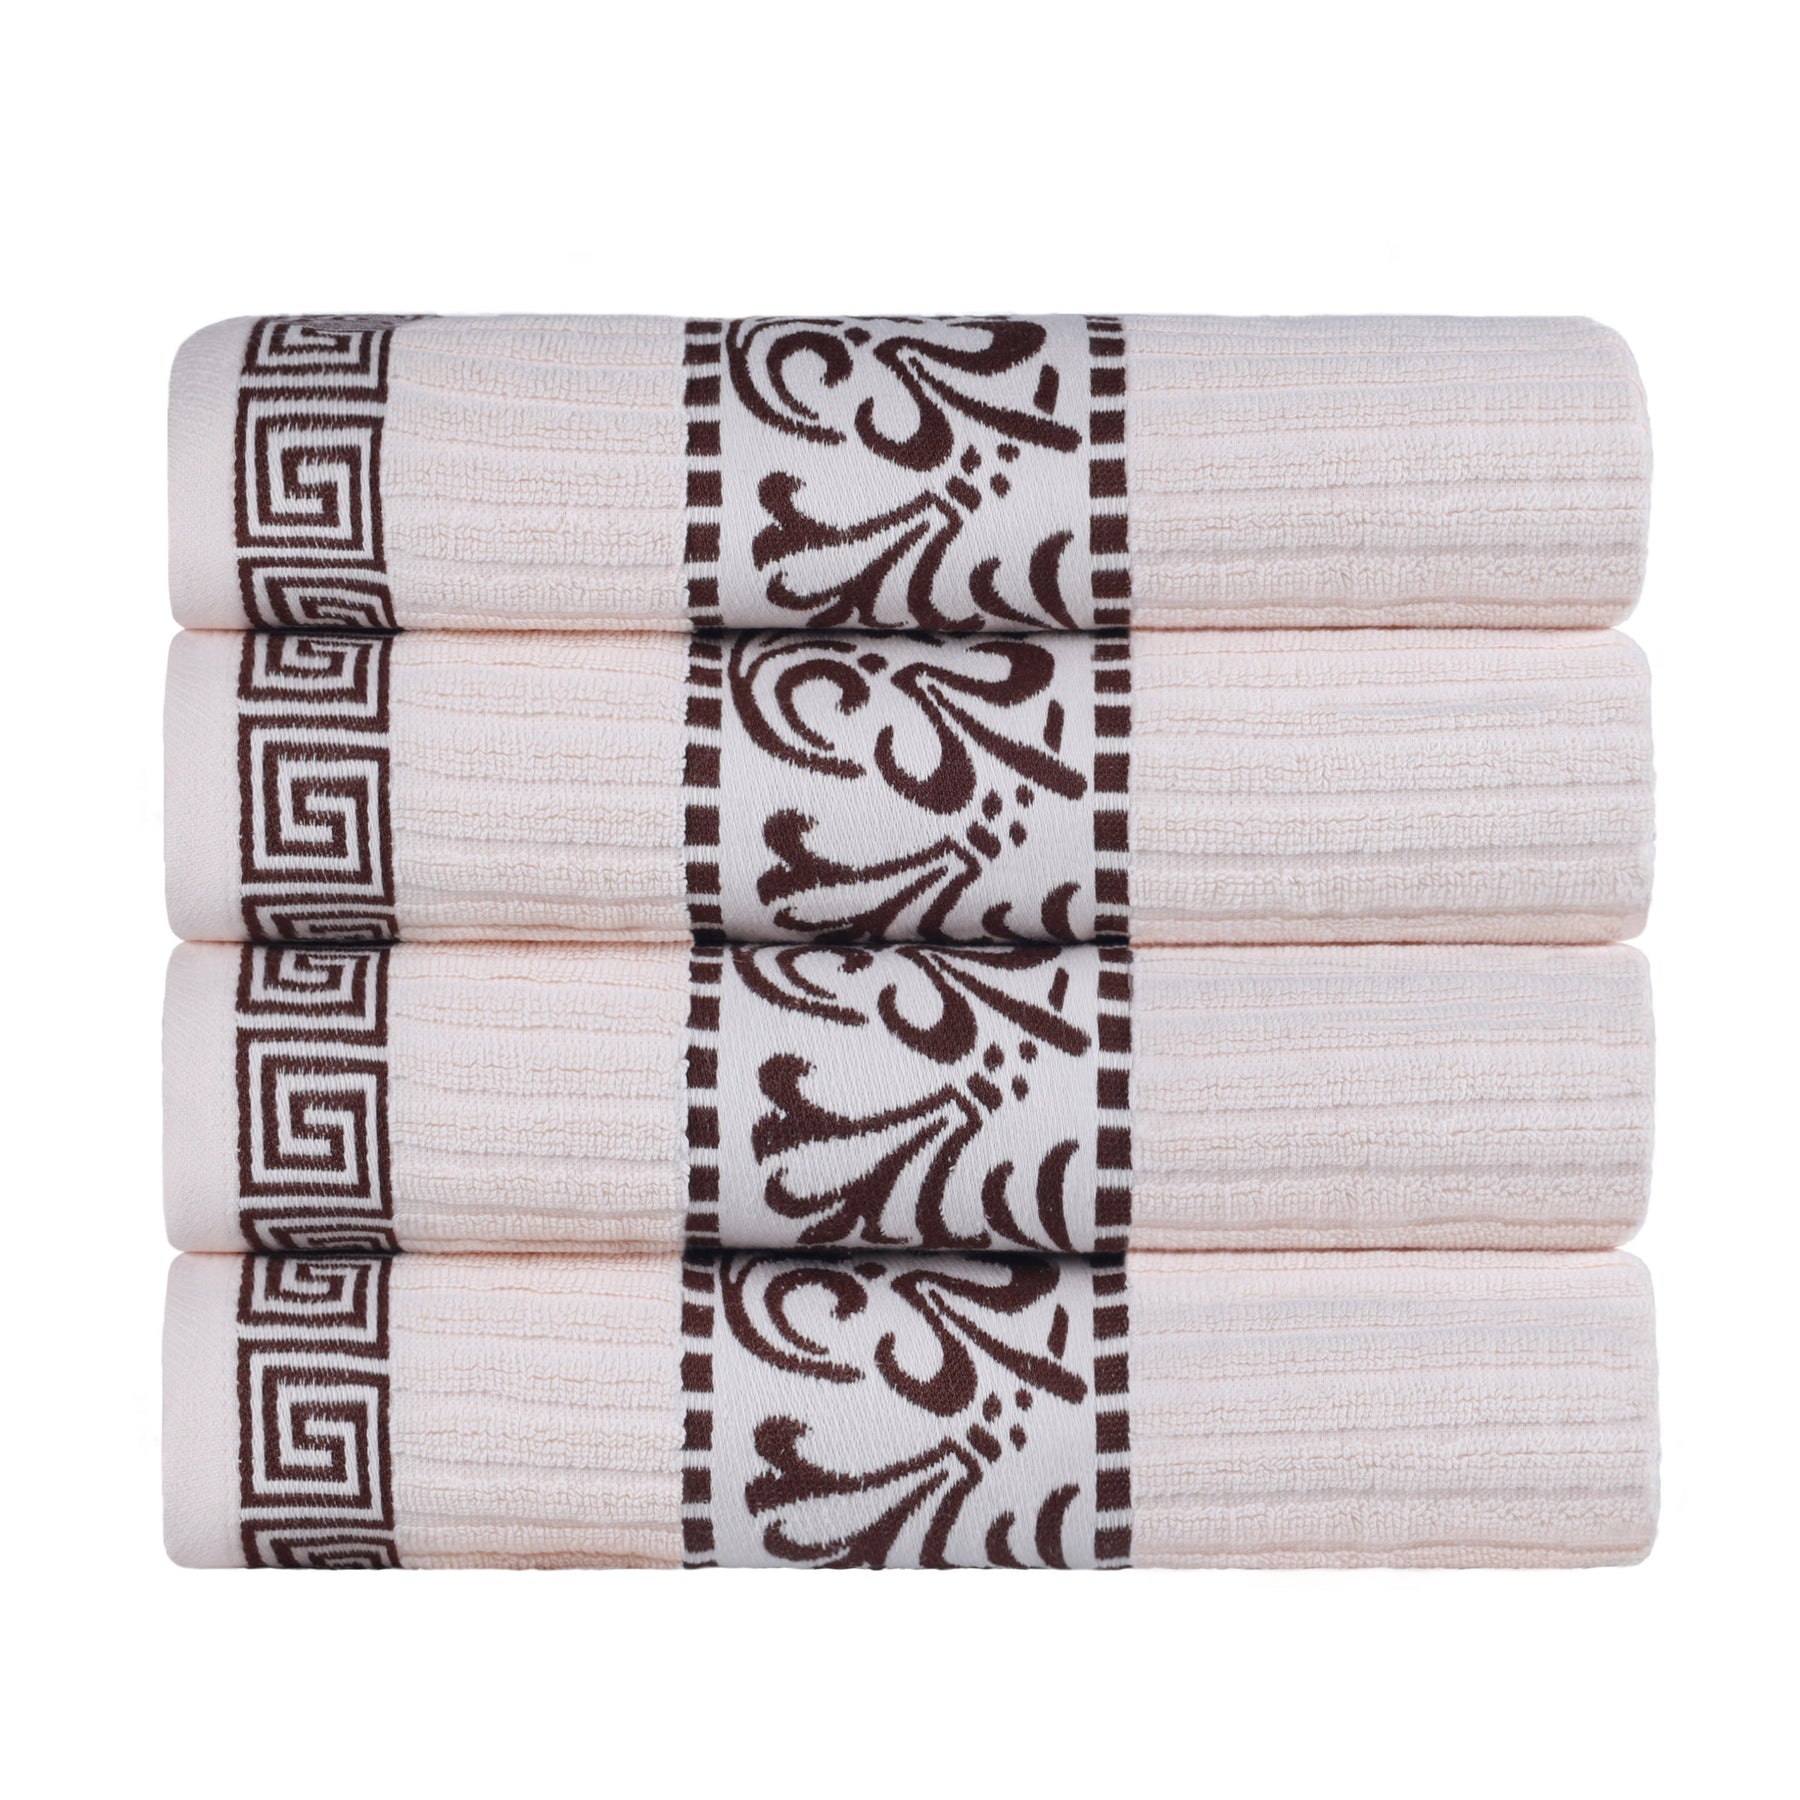 Superior Athens Cotton 4-Piece Bath Towel Set with Greek Scroll and Floral Pattern - Ivory-Chocolate